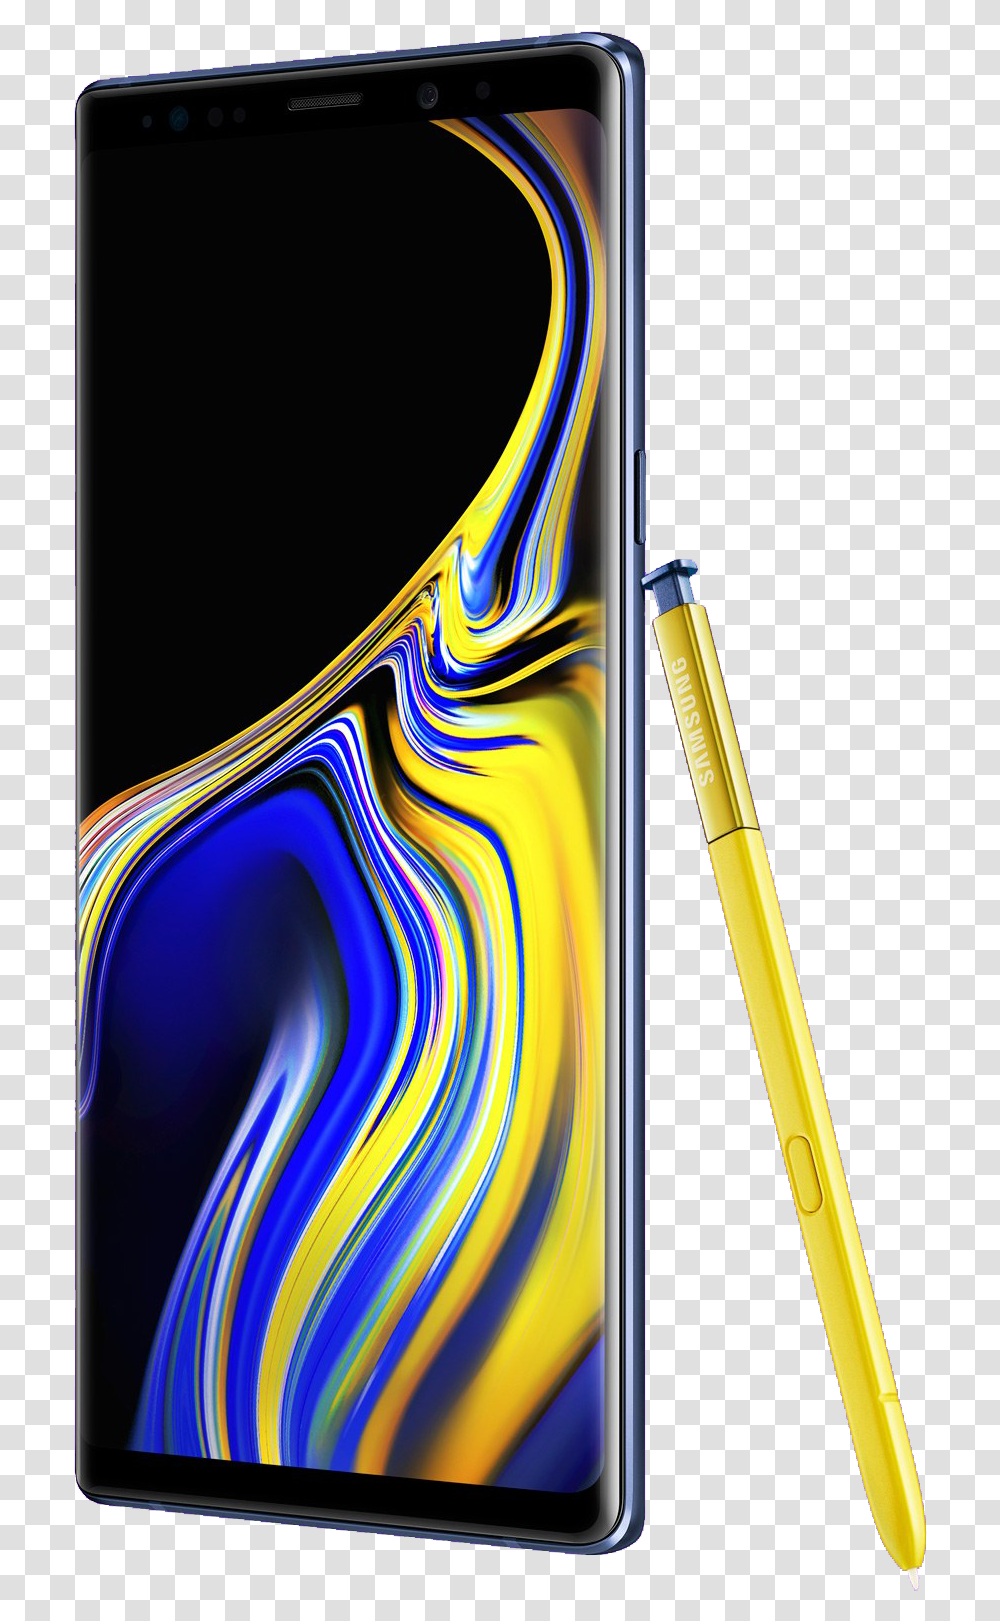 Samsung Galaxy Note 9 2018 Hd Samsung Galaxy Note 9 Stock, Mobile Phone, Electronics Transparent Png